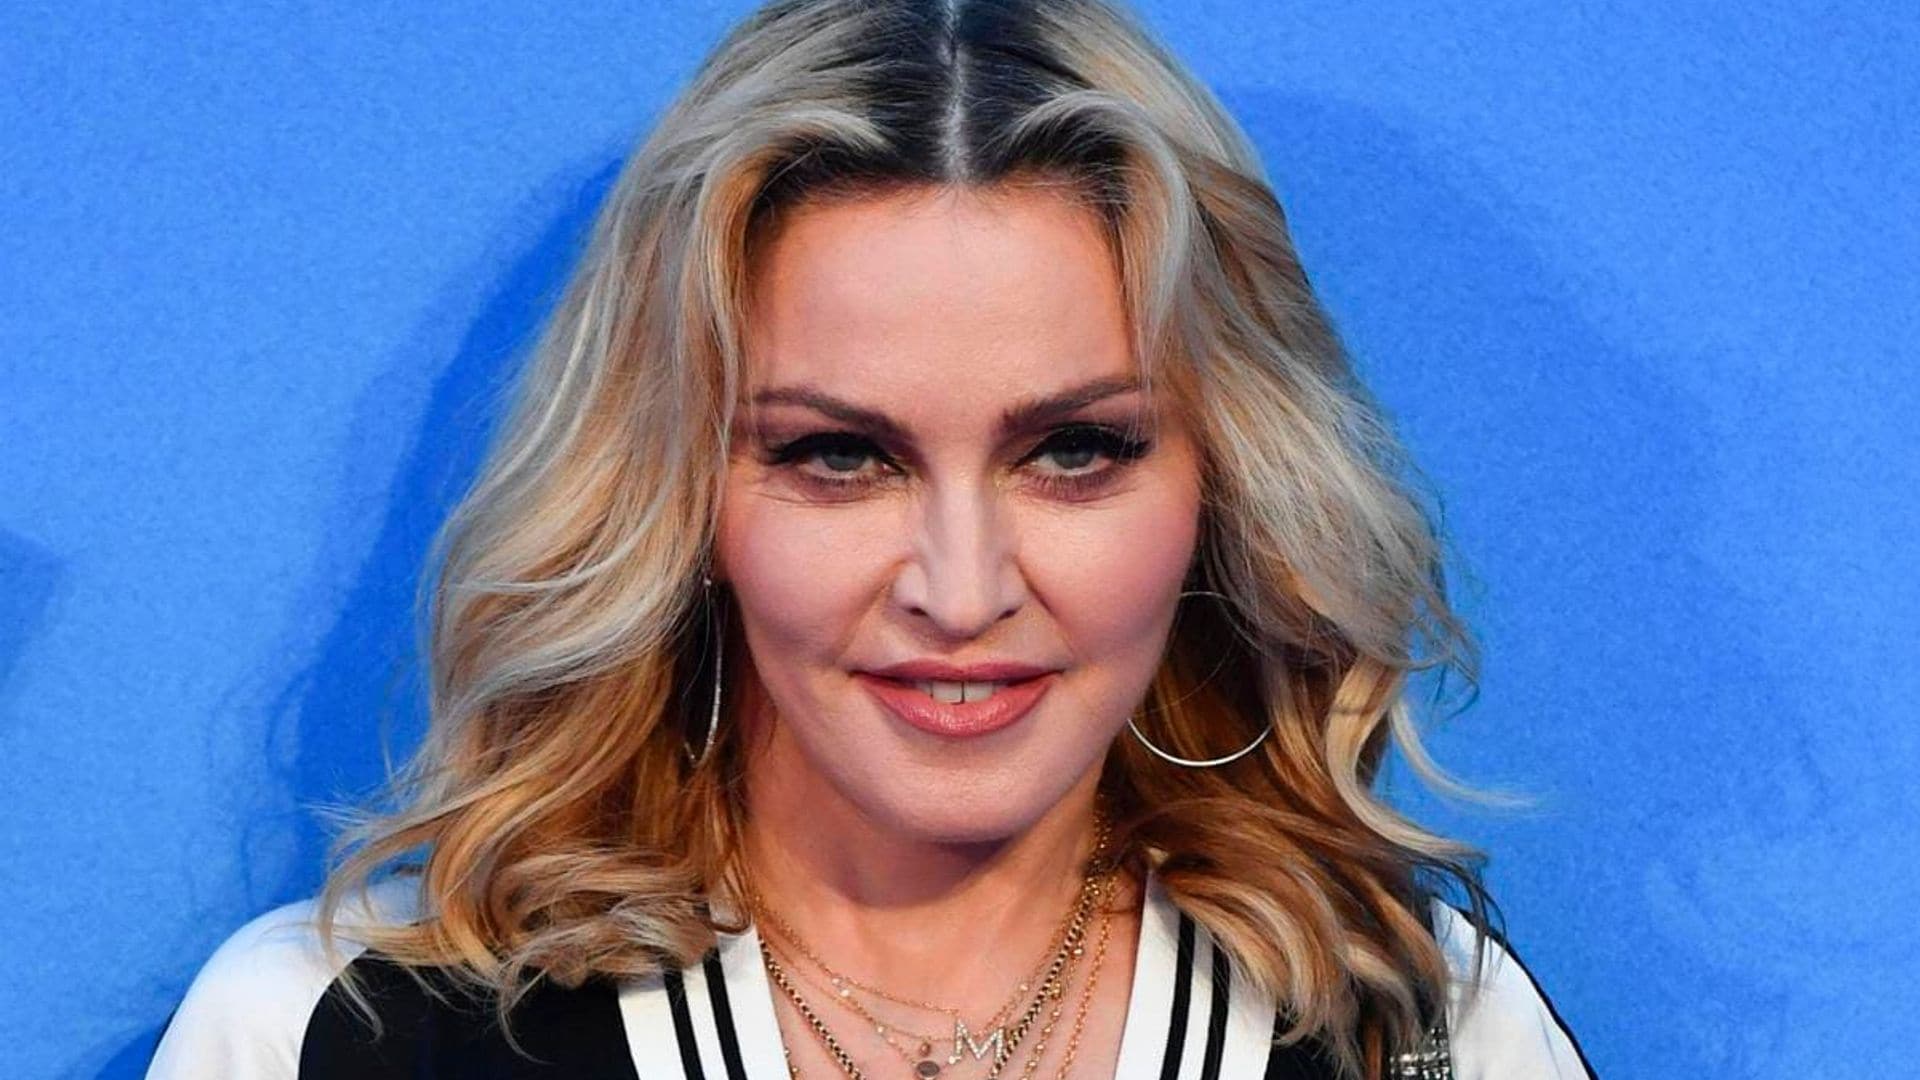 Madonna shows off her latest tattoo, the Kabbalah Tree of Life